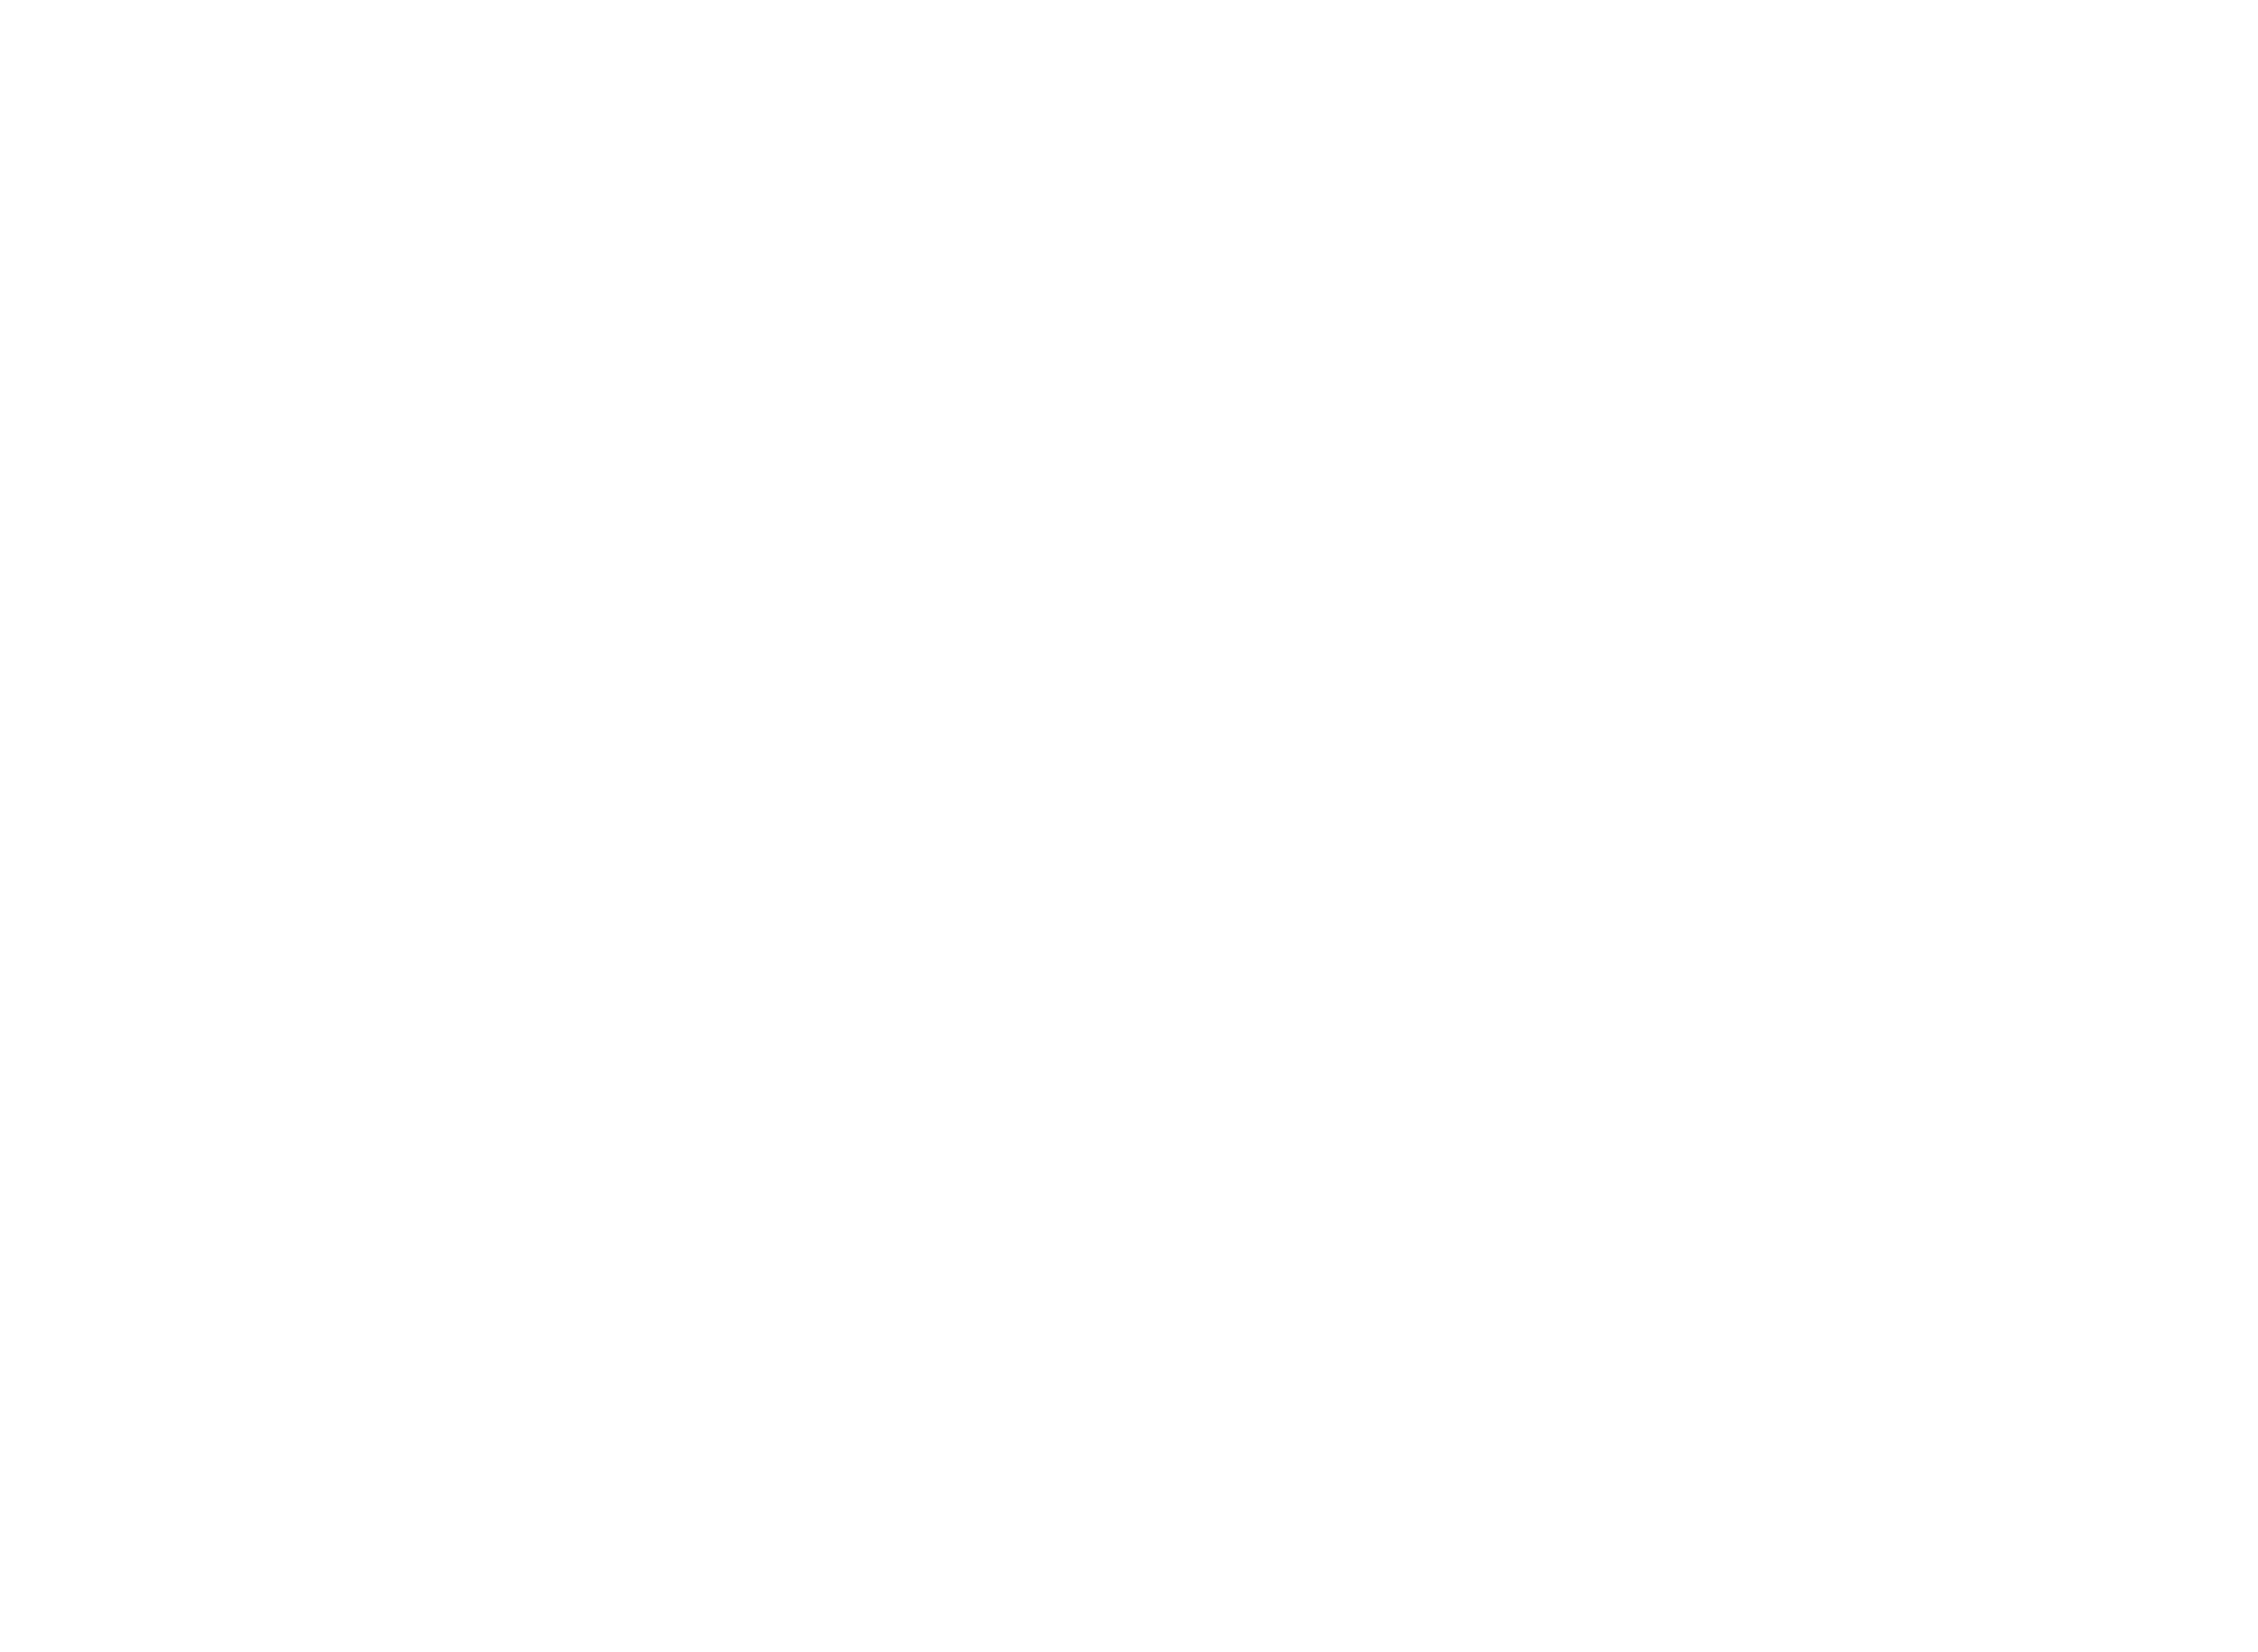 All Ears Brokerage Services